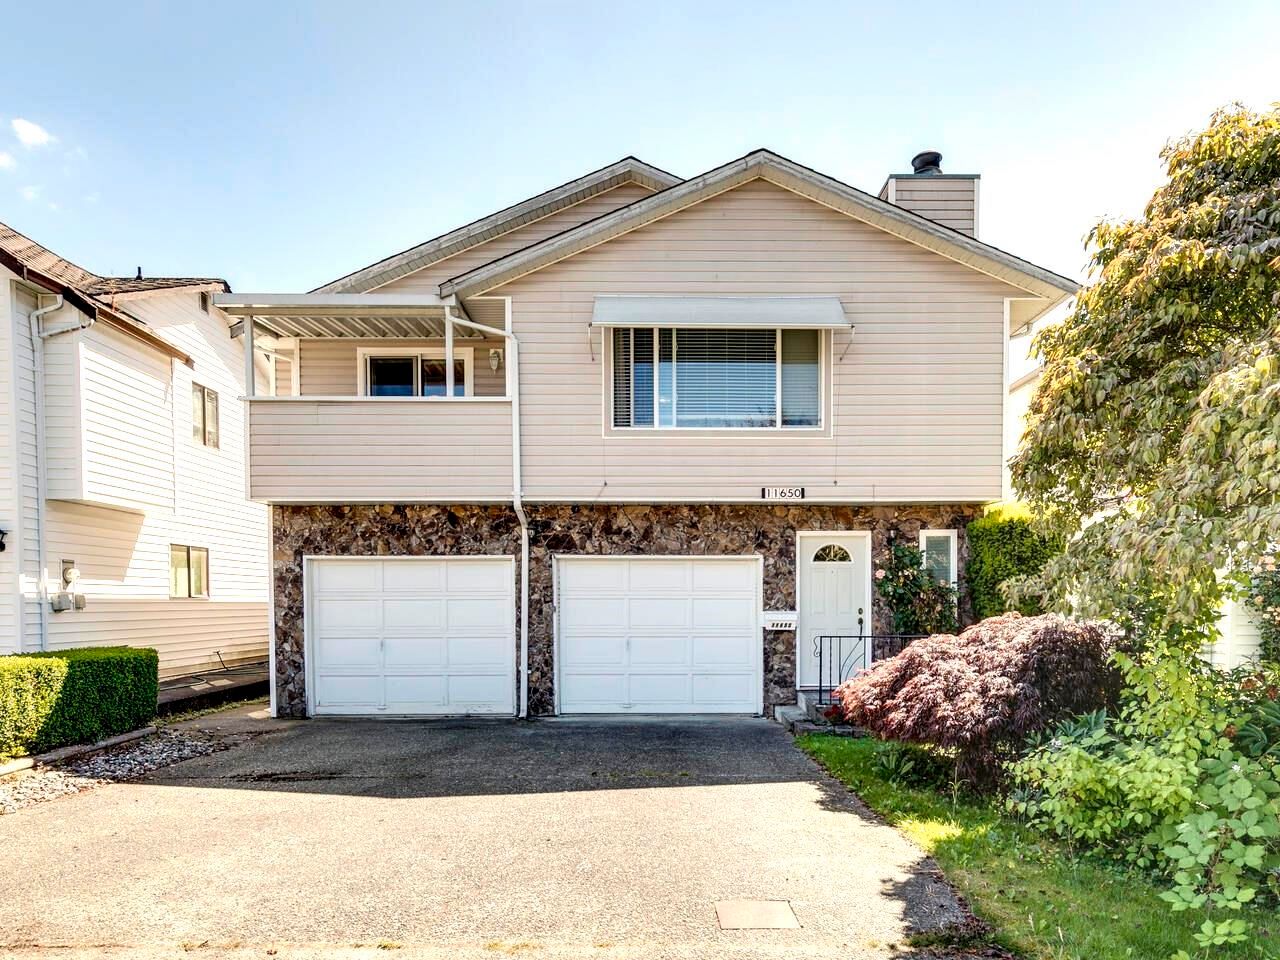 Open House on Saturday, September 24, 2022 2:00PM - 4:00PM
This truly is the home that serious Buyers hope to find.  Already one of the more affordable homes for sale in Maple Ridge, you'll love that the home has been gently lived in, is almost spotless, 